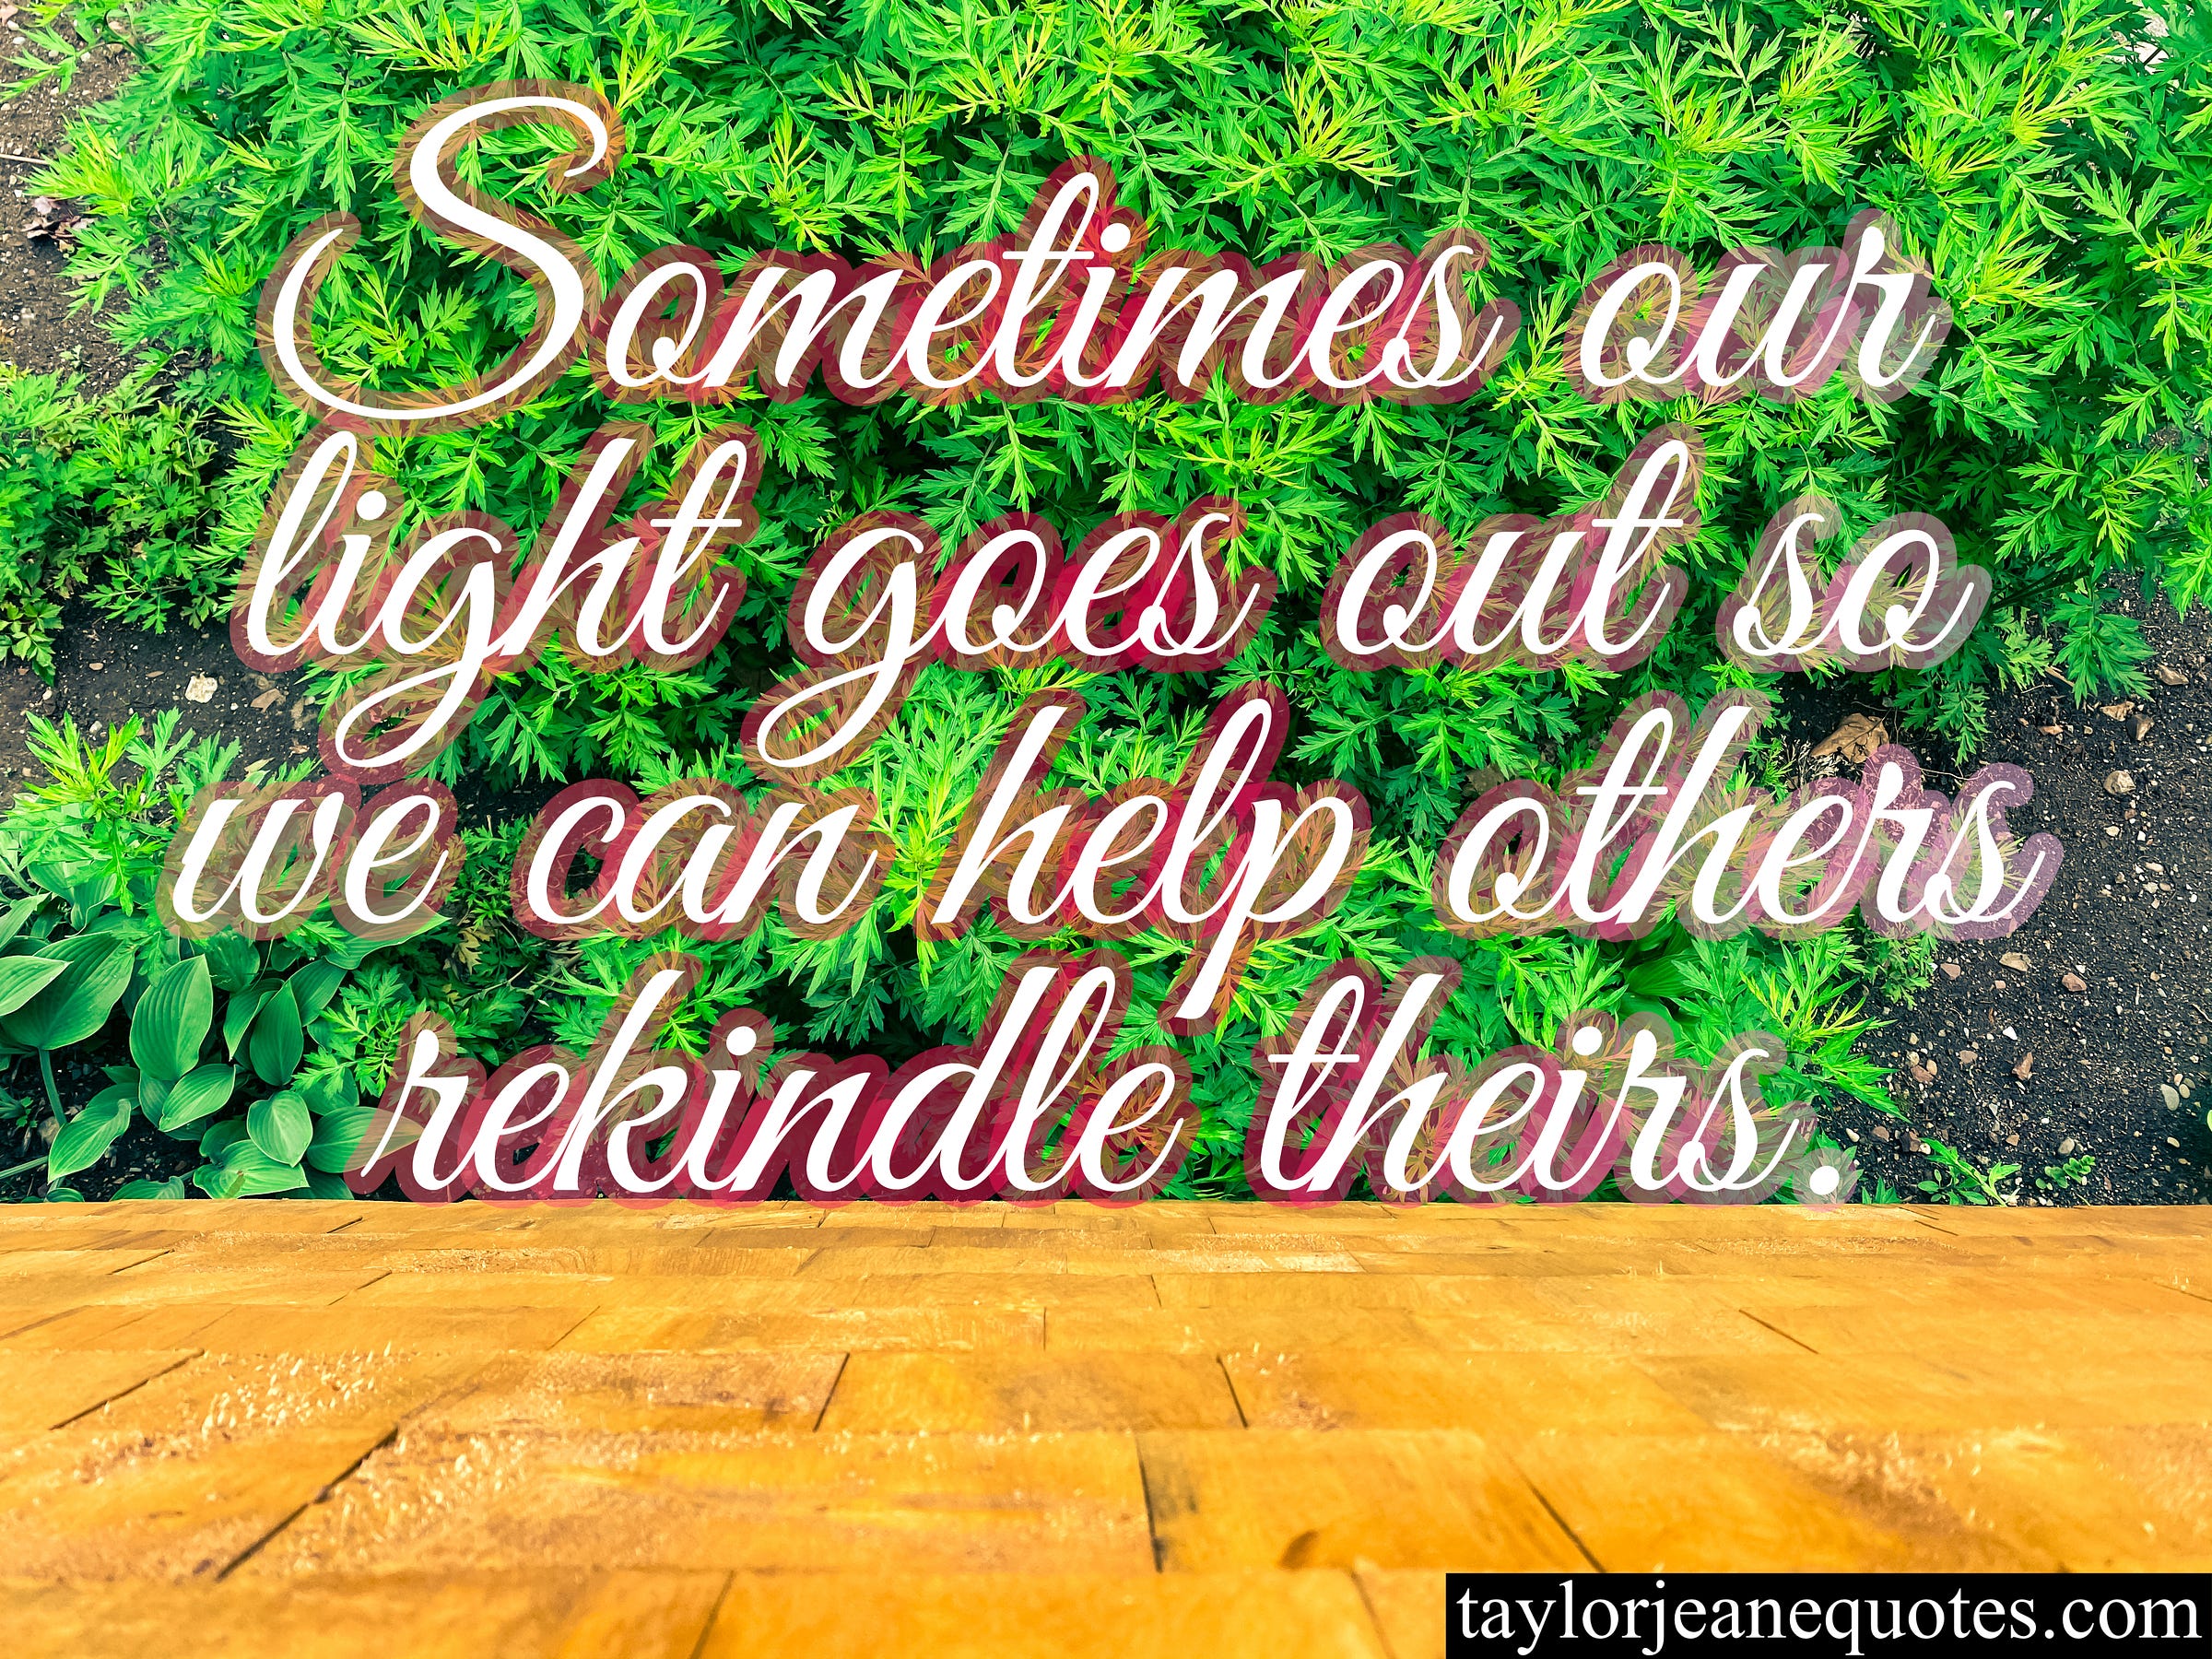 taylor jeane quotes, taylor jeane, taylor wilson, free daily motivational quotes, free inspirational daily quotes, kindness quotes, lift up others quotes, uplifting quotes, sentimental quotes, light quotes, friendship quotes, helping quotes, community quotes, purpose quotes, sometimes our light goes out so we can help others rekindle theirs quote